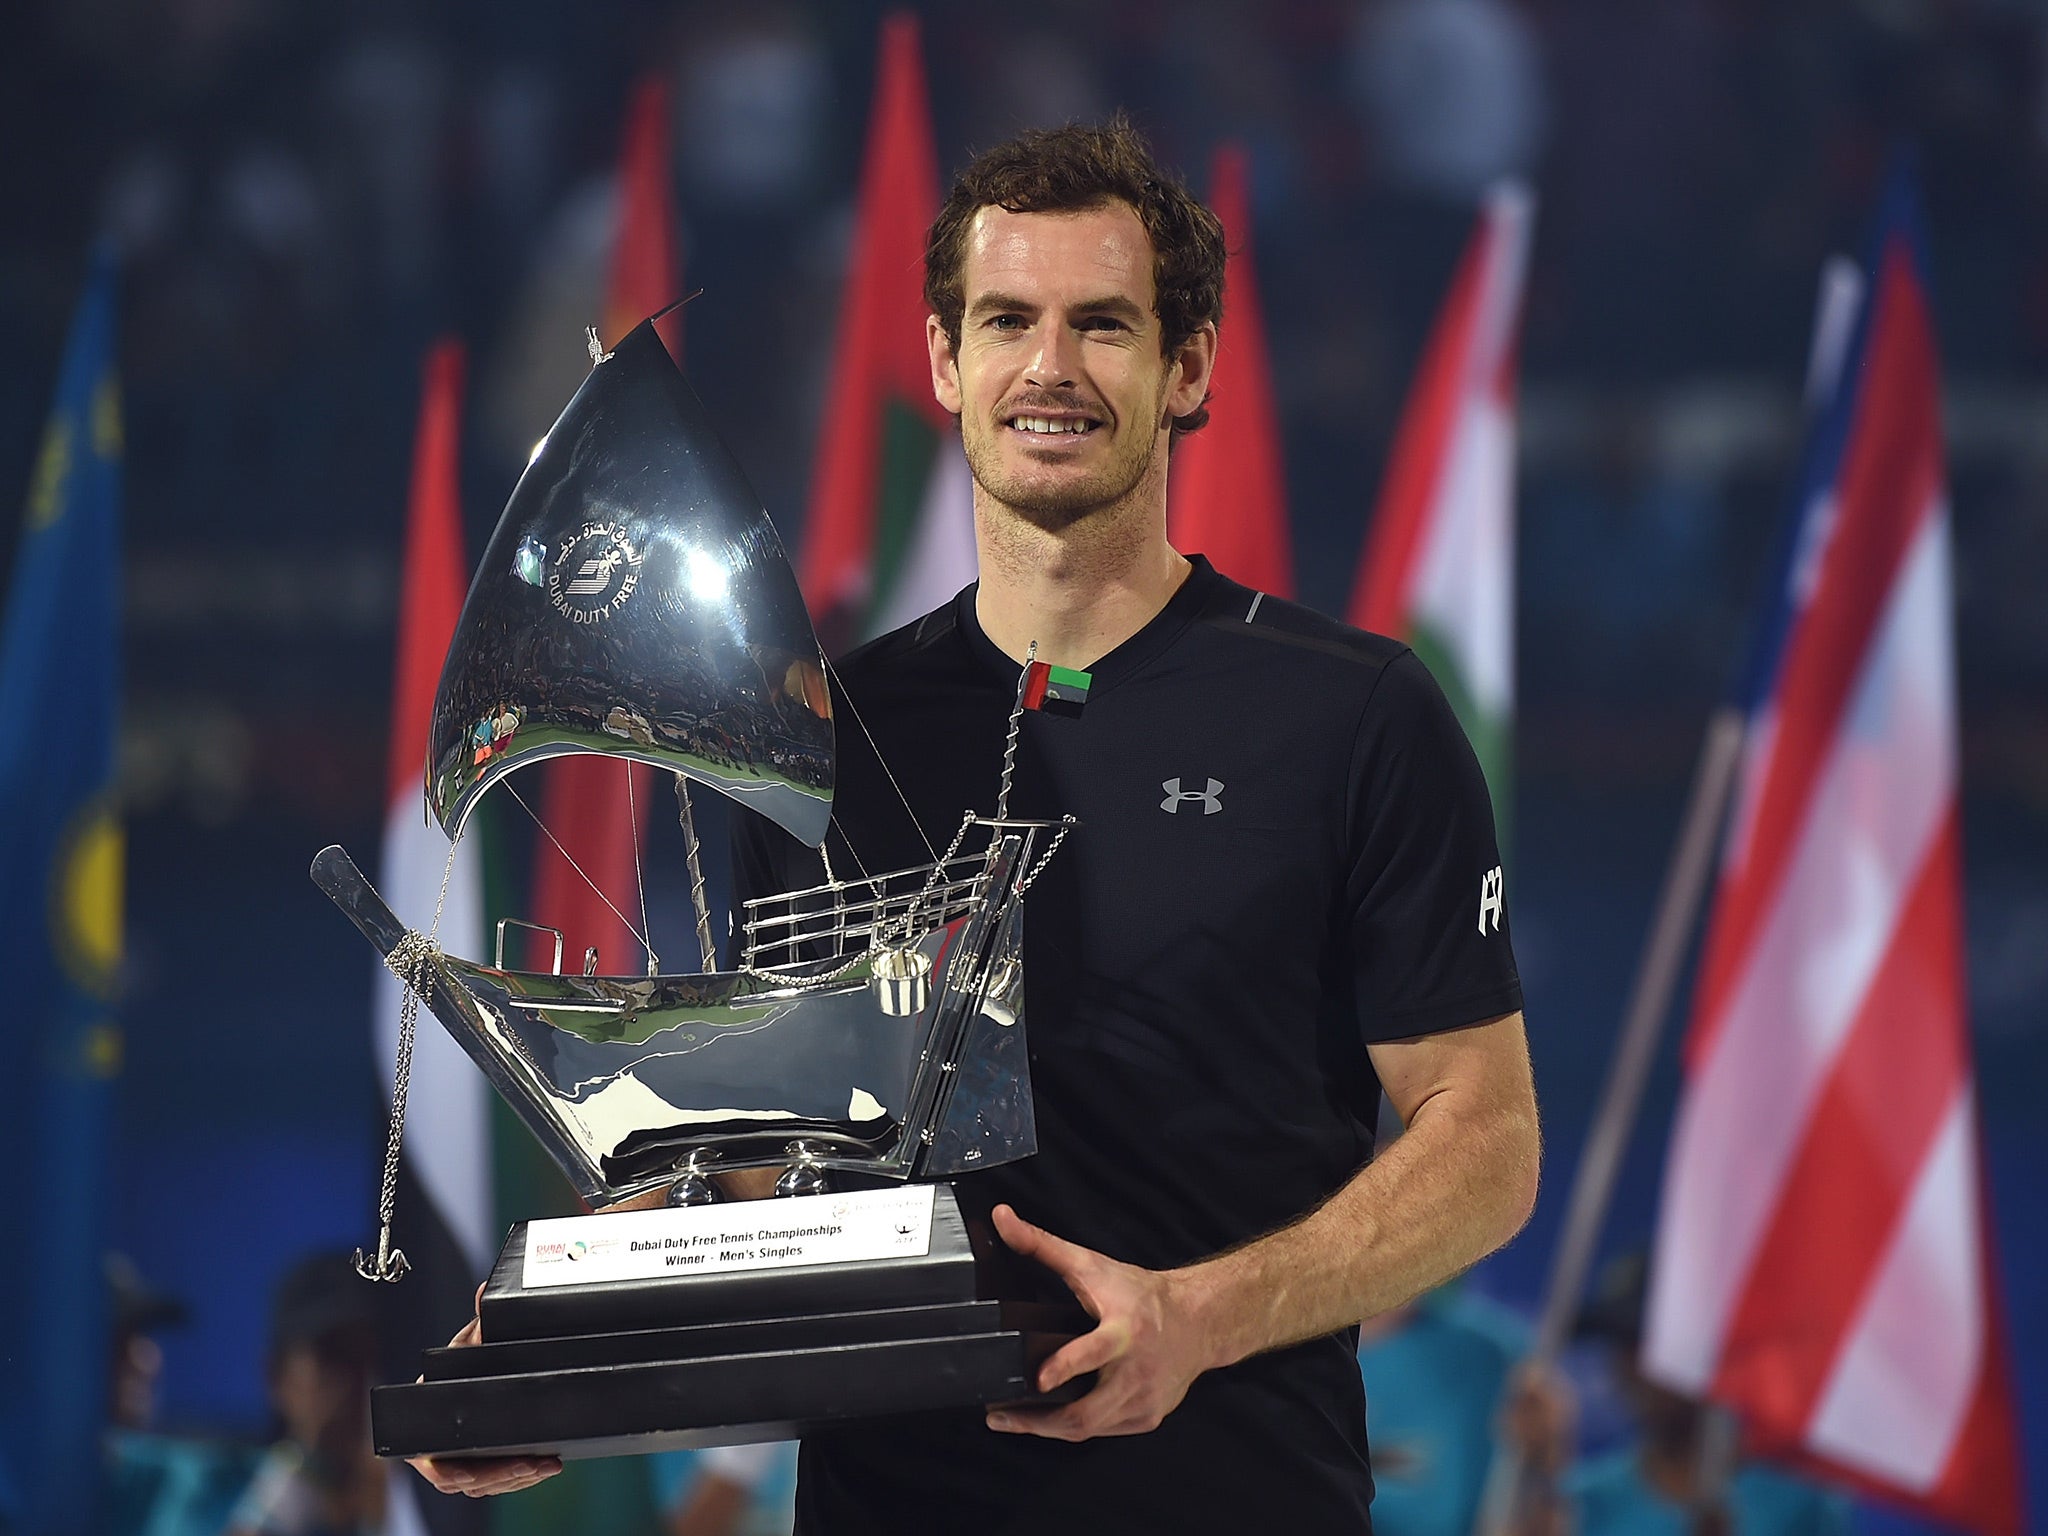 Andy Murray pulls out of Dubai tournament after run to final in